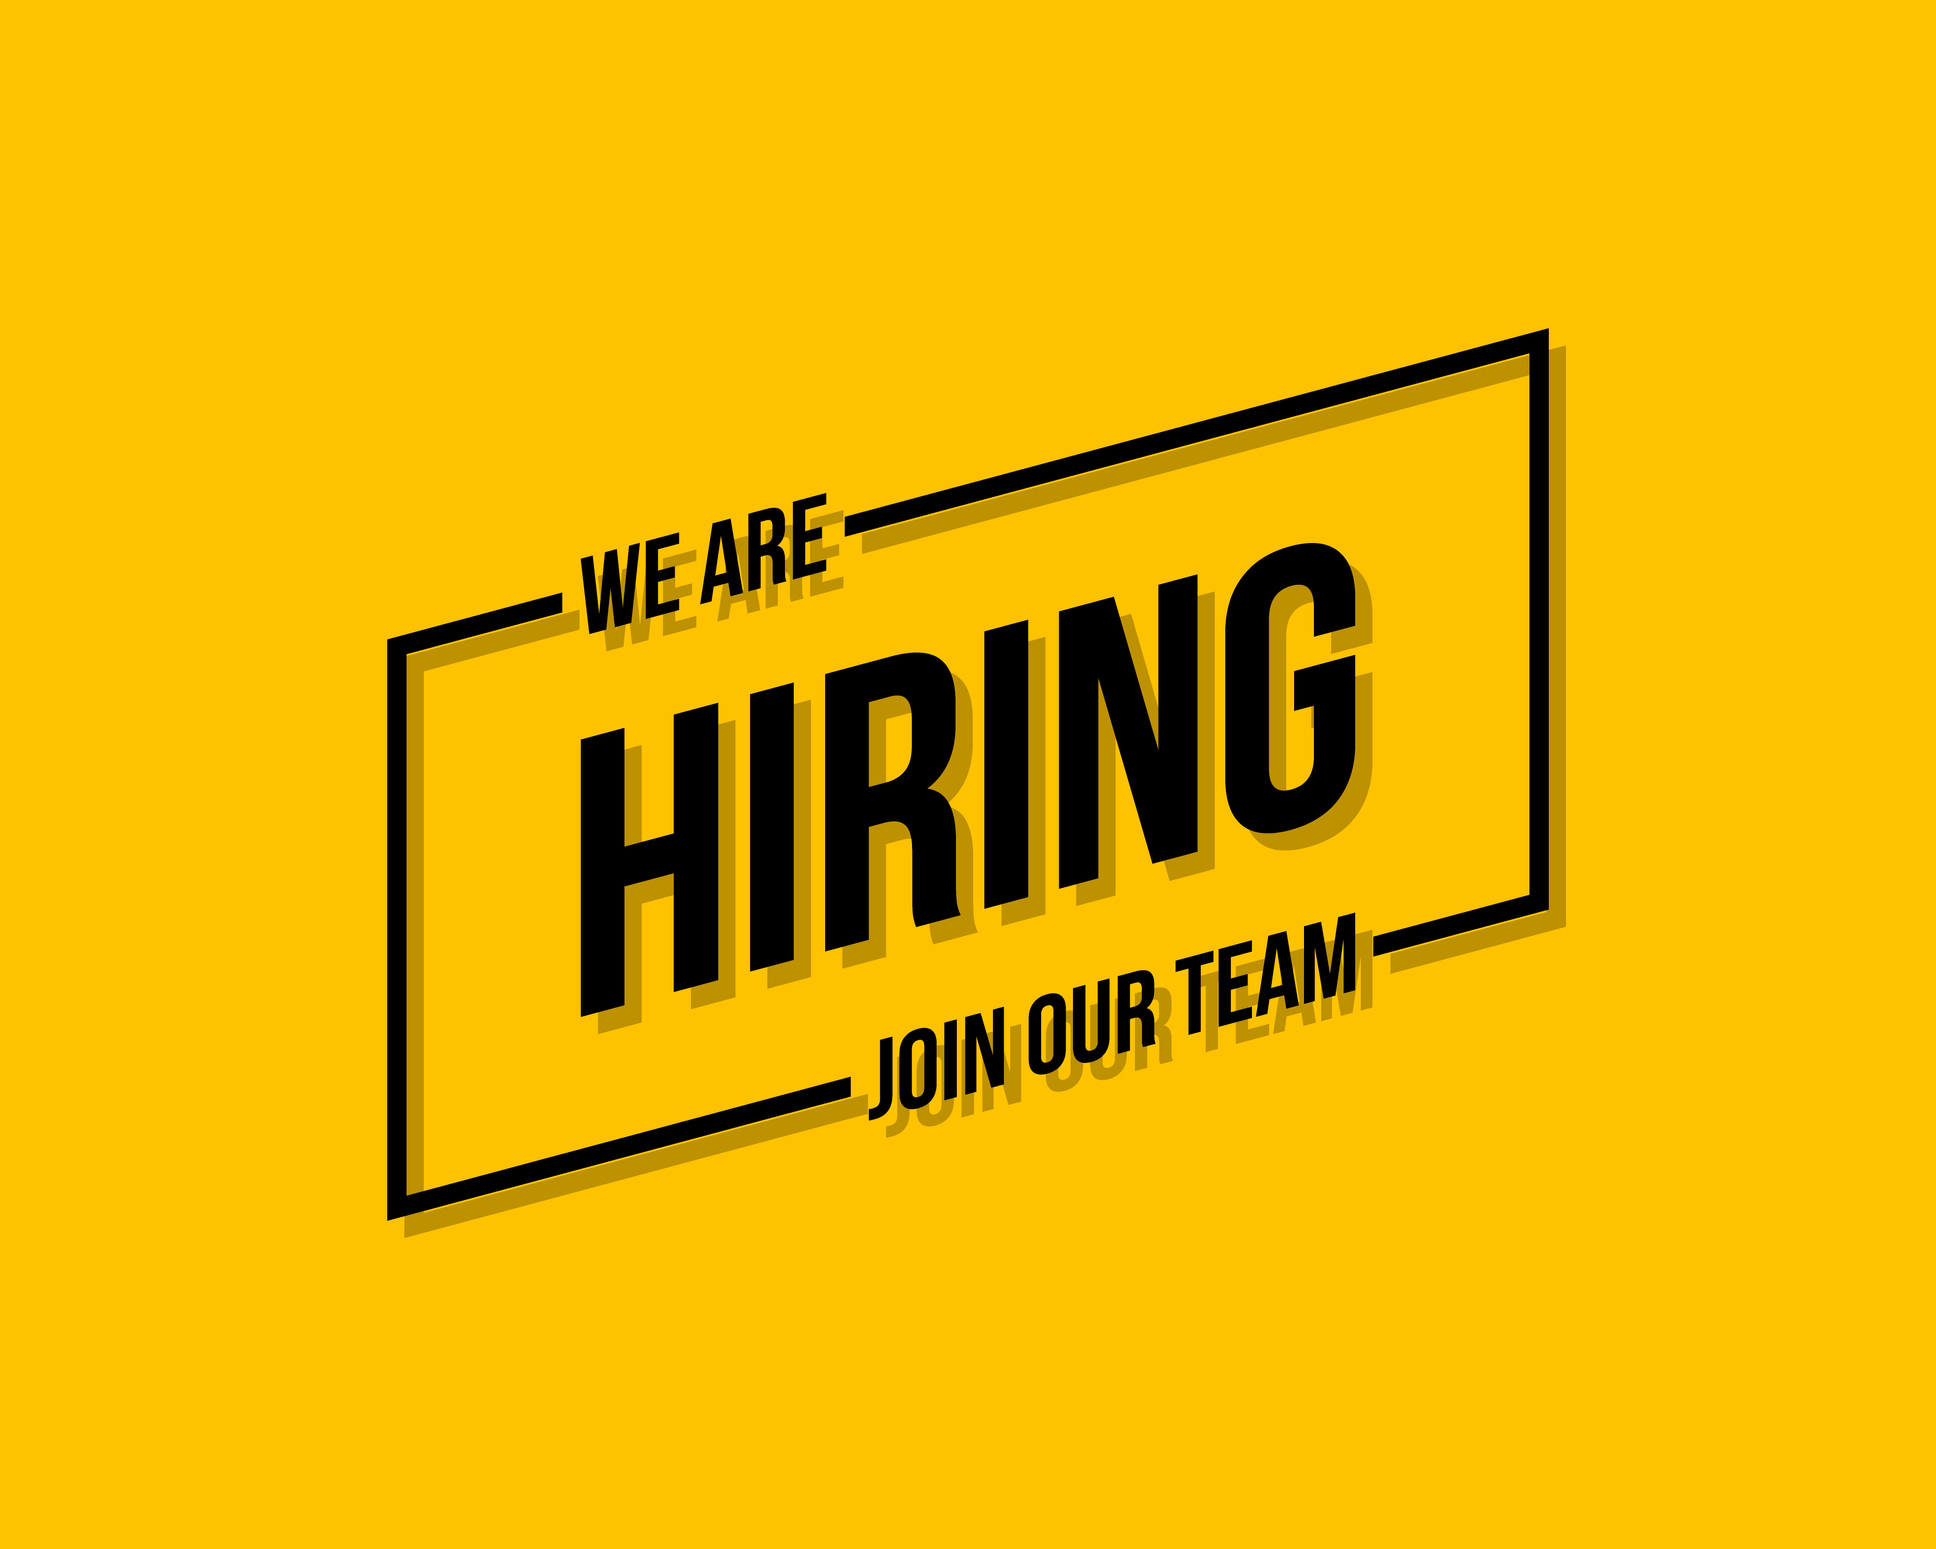 we are hiring, join our team, flat vector poster or banner illustration on yellow background